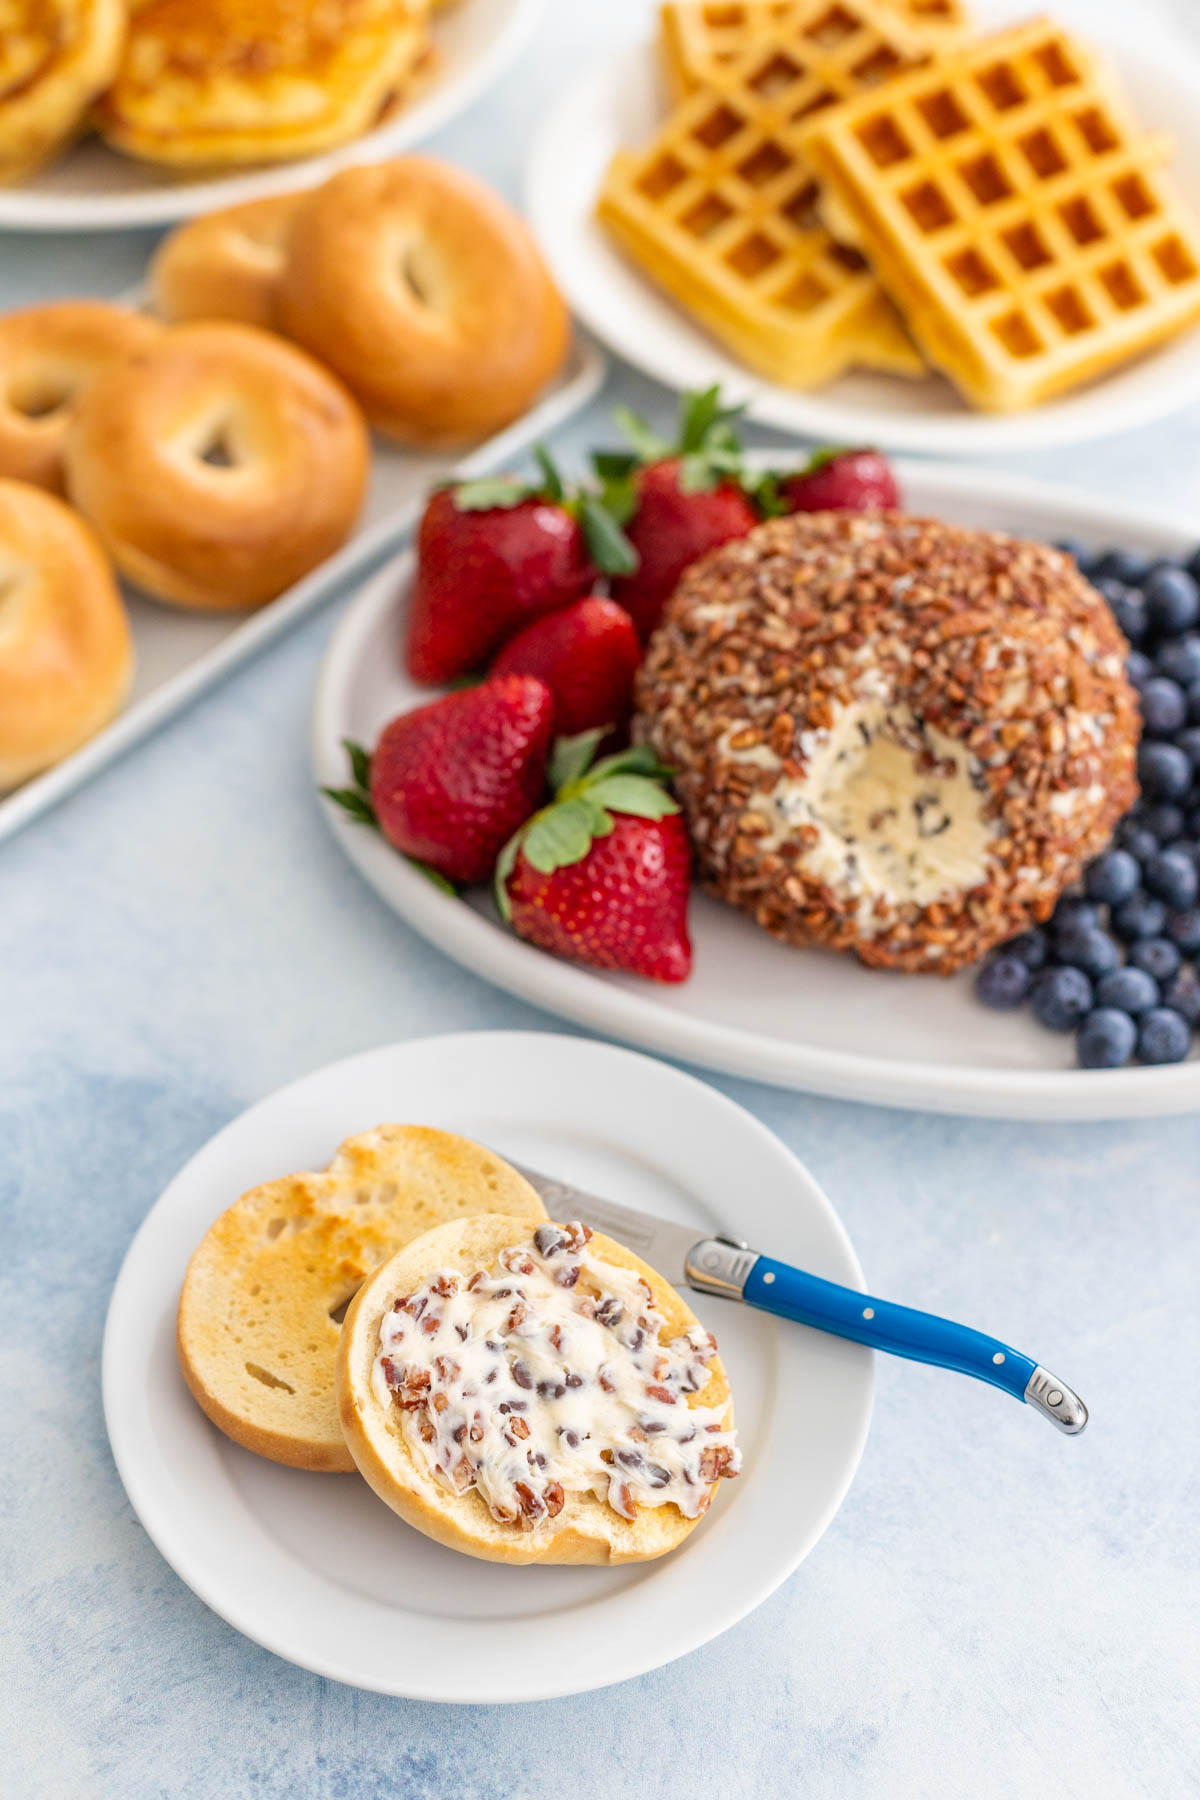 A bagel has been spread with a bit of the chocolate chip cheese ball.